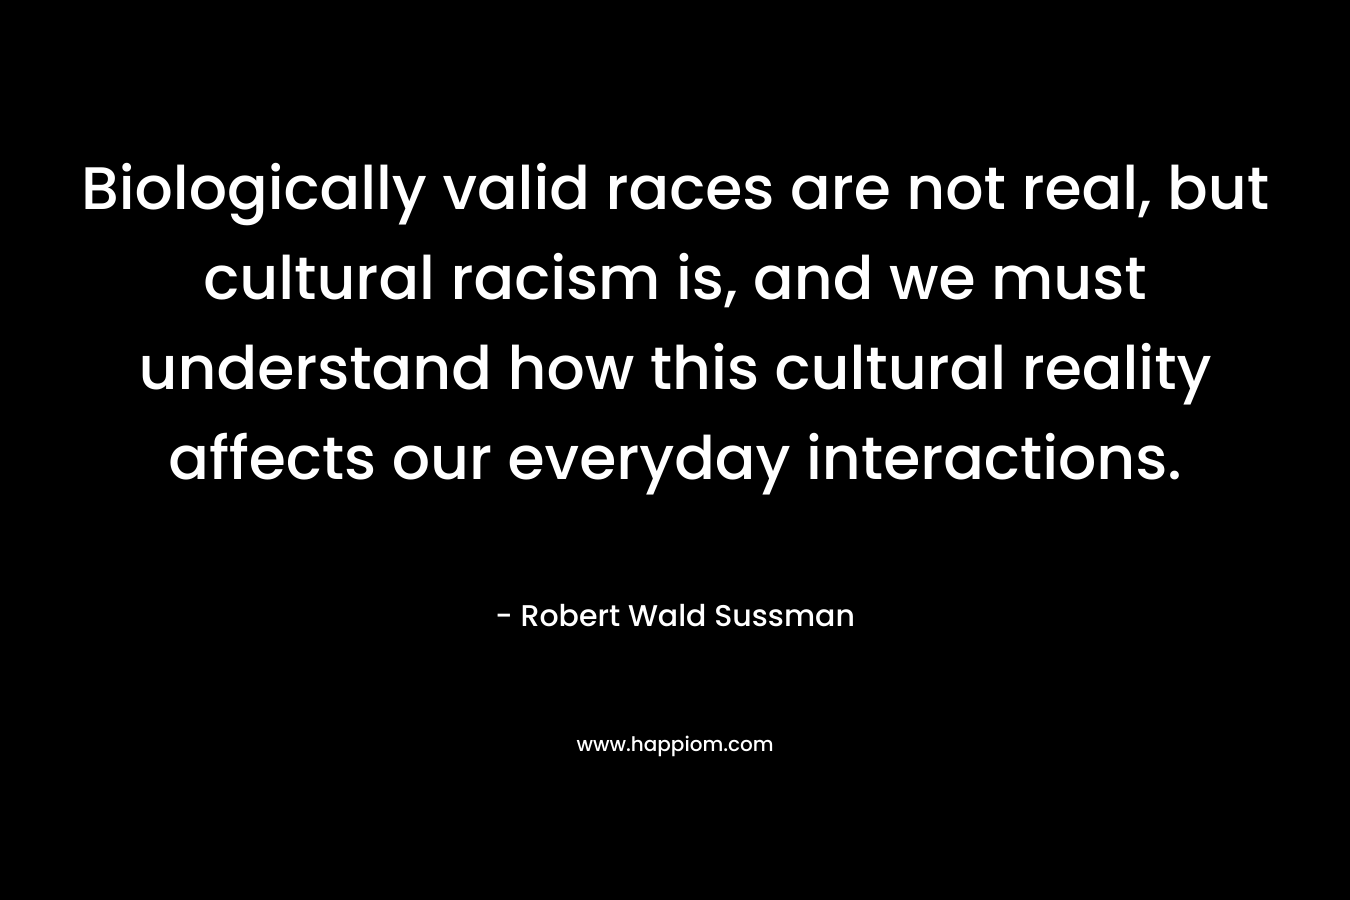 Biologically valid races are not real, but cultural racism is, and we must understand how this cultural reality affects our everyday interactions. – Robert Wald Sussman